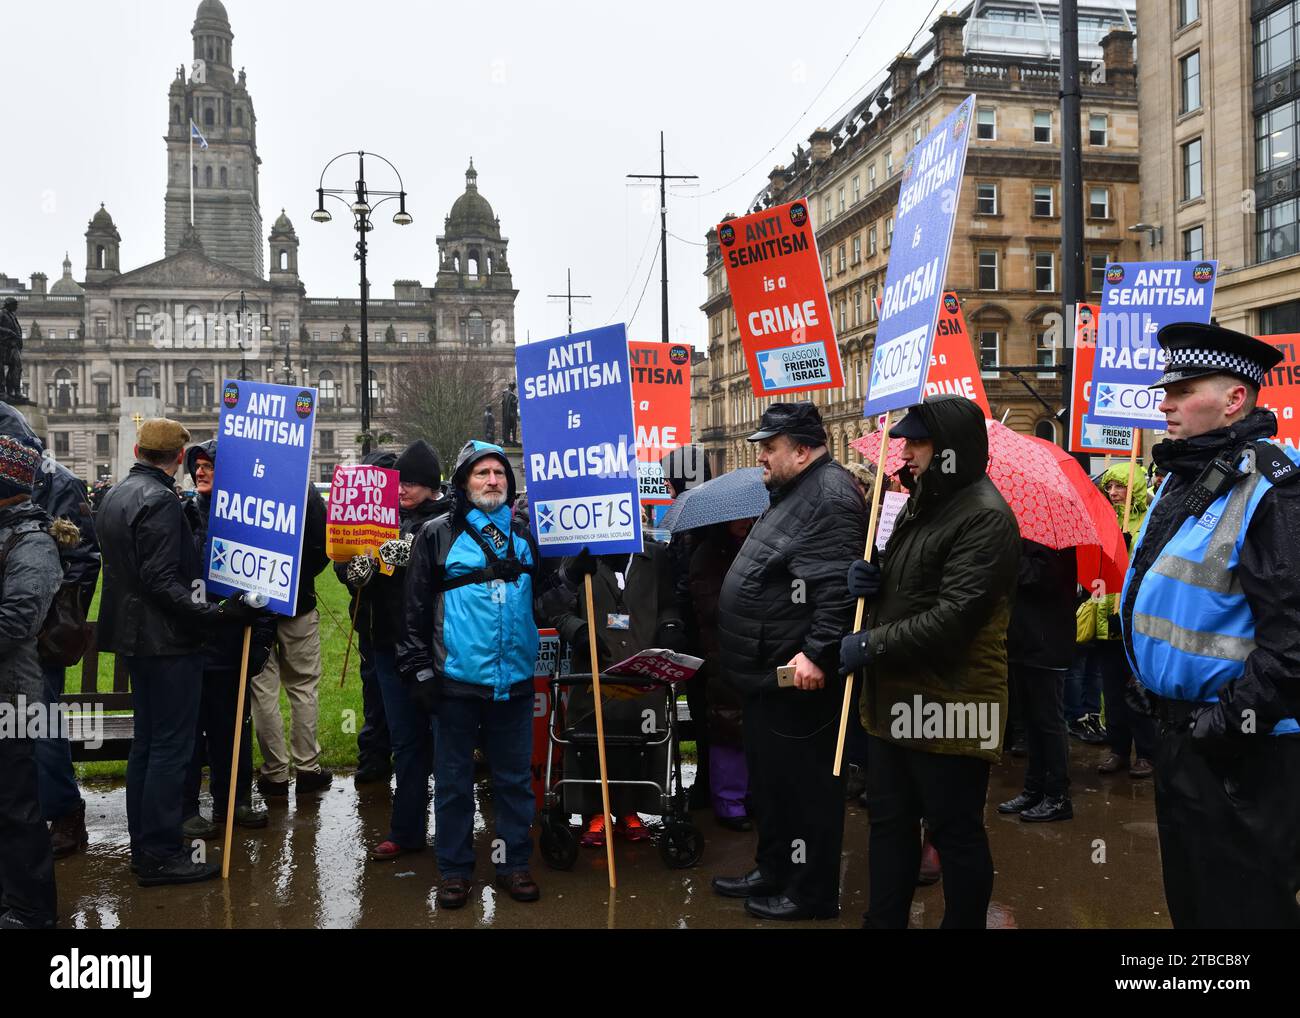 Counter demonstration against anti-Semitism in the centre of Glasgow, Scotland Stock Photo